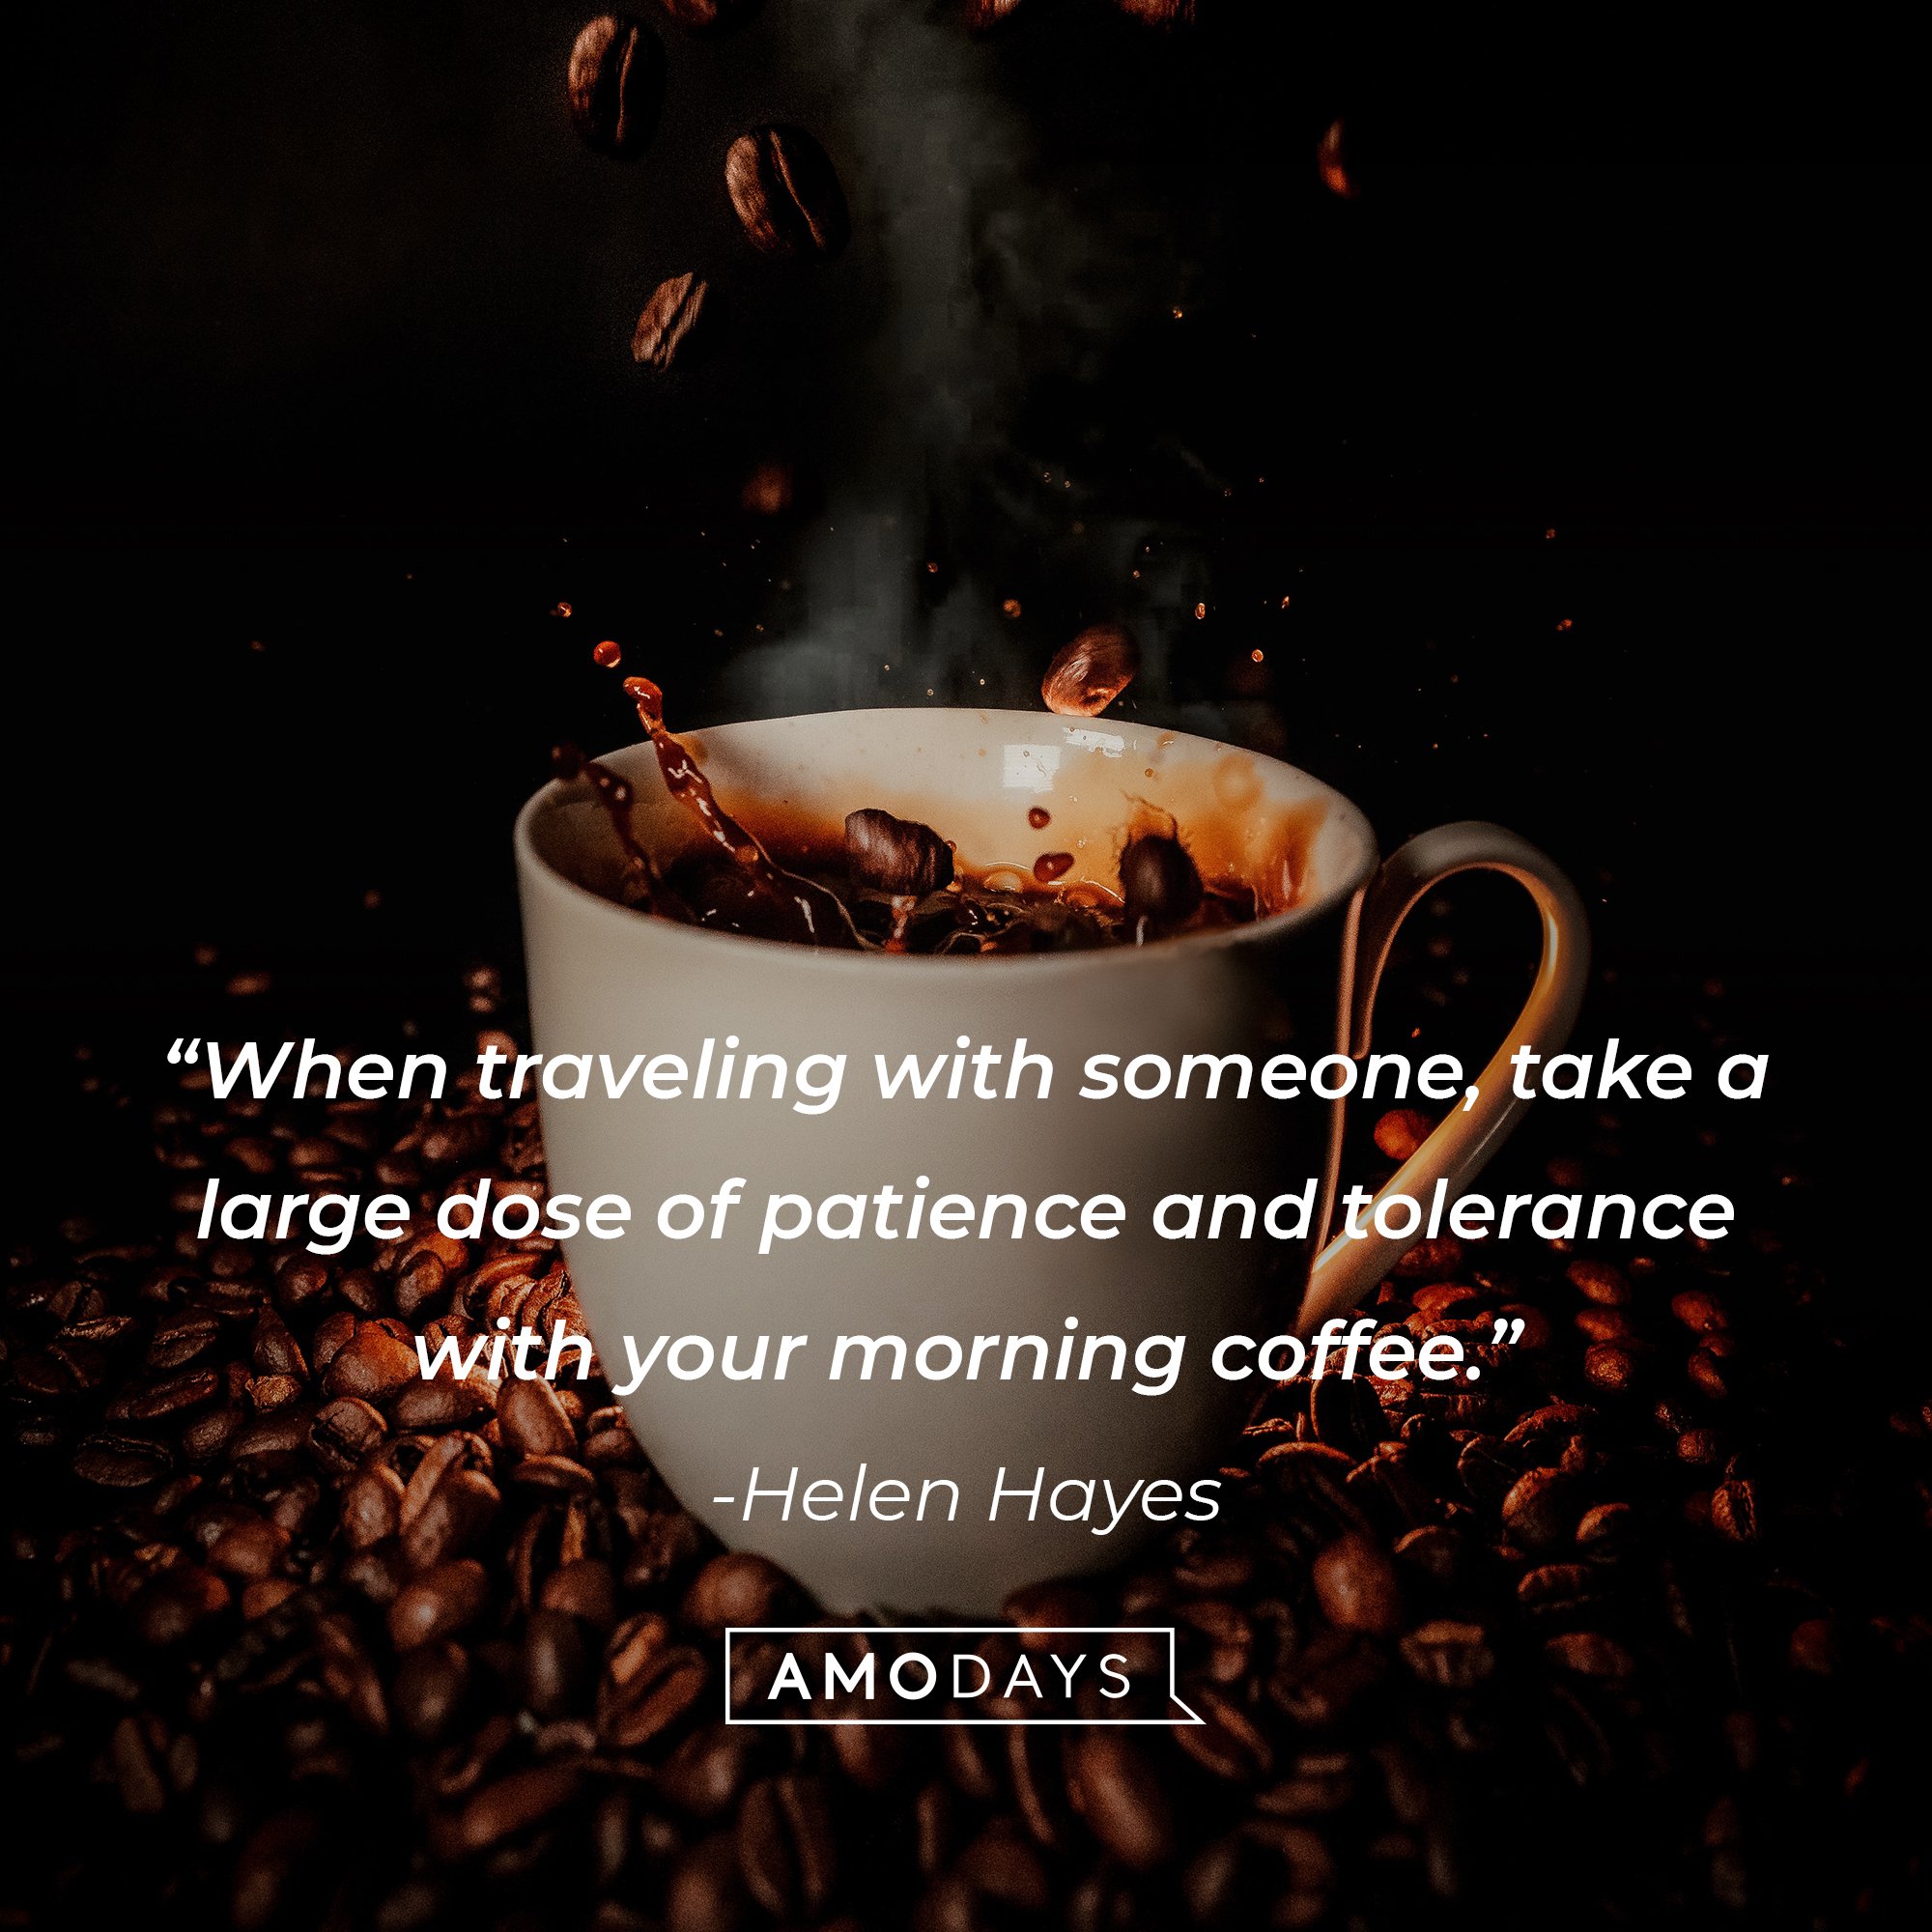 Helen Hayes' quote: "When traveling with someone, take a large dose of patience and tolerance with your morning coffee." | Image: AmoDays